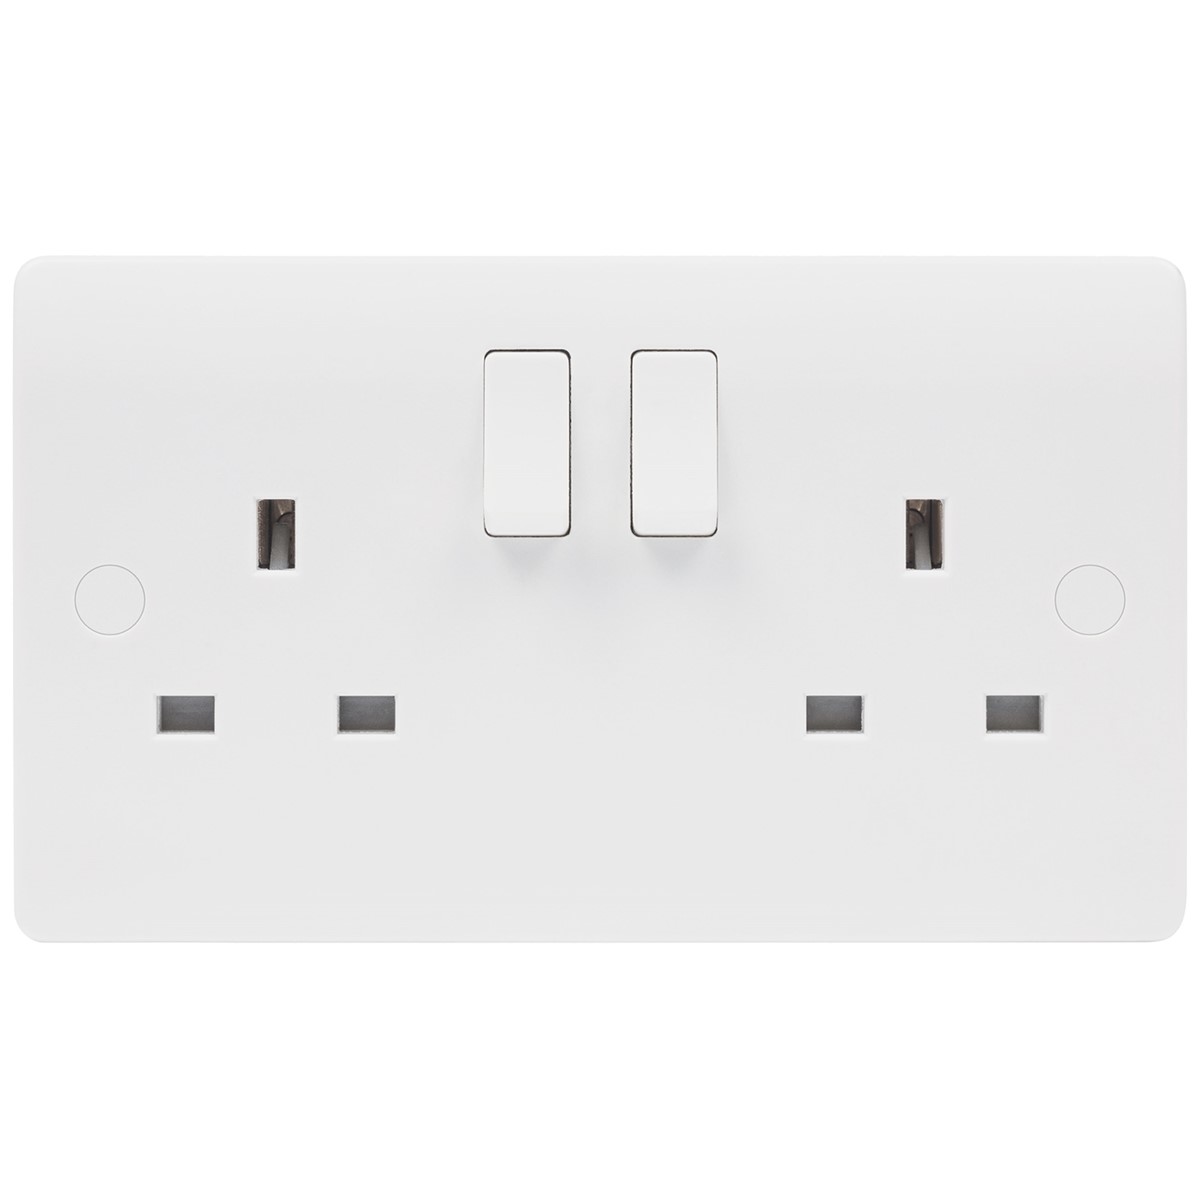 Niglon NS132DPS Median 2 Gang Double Pole Switched Socket Outlet White